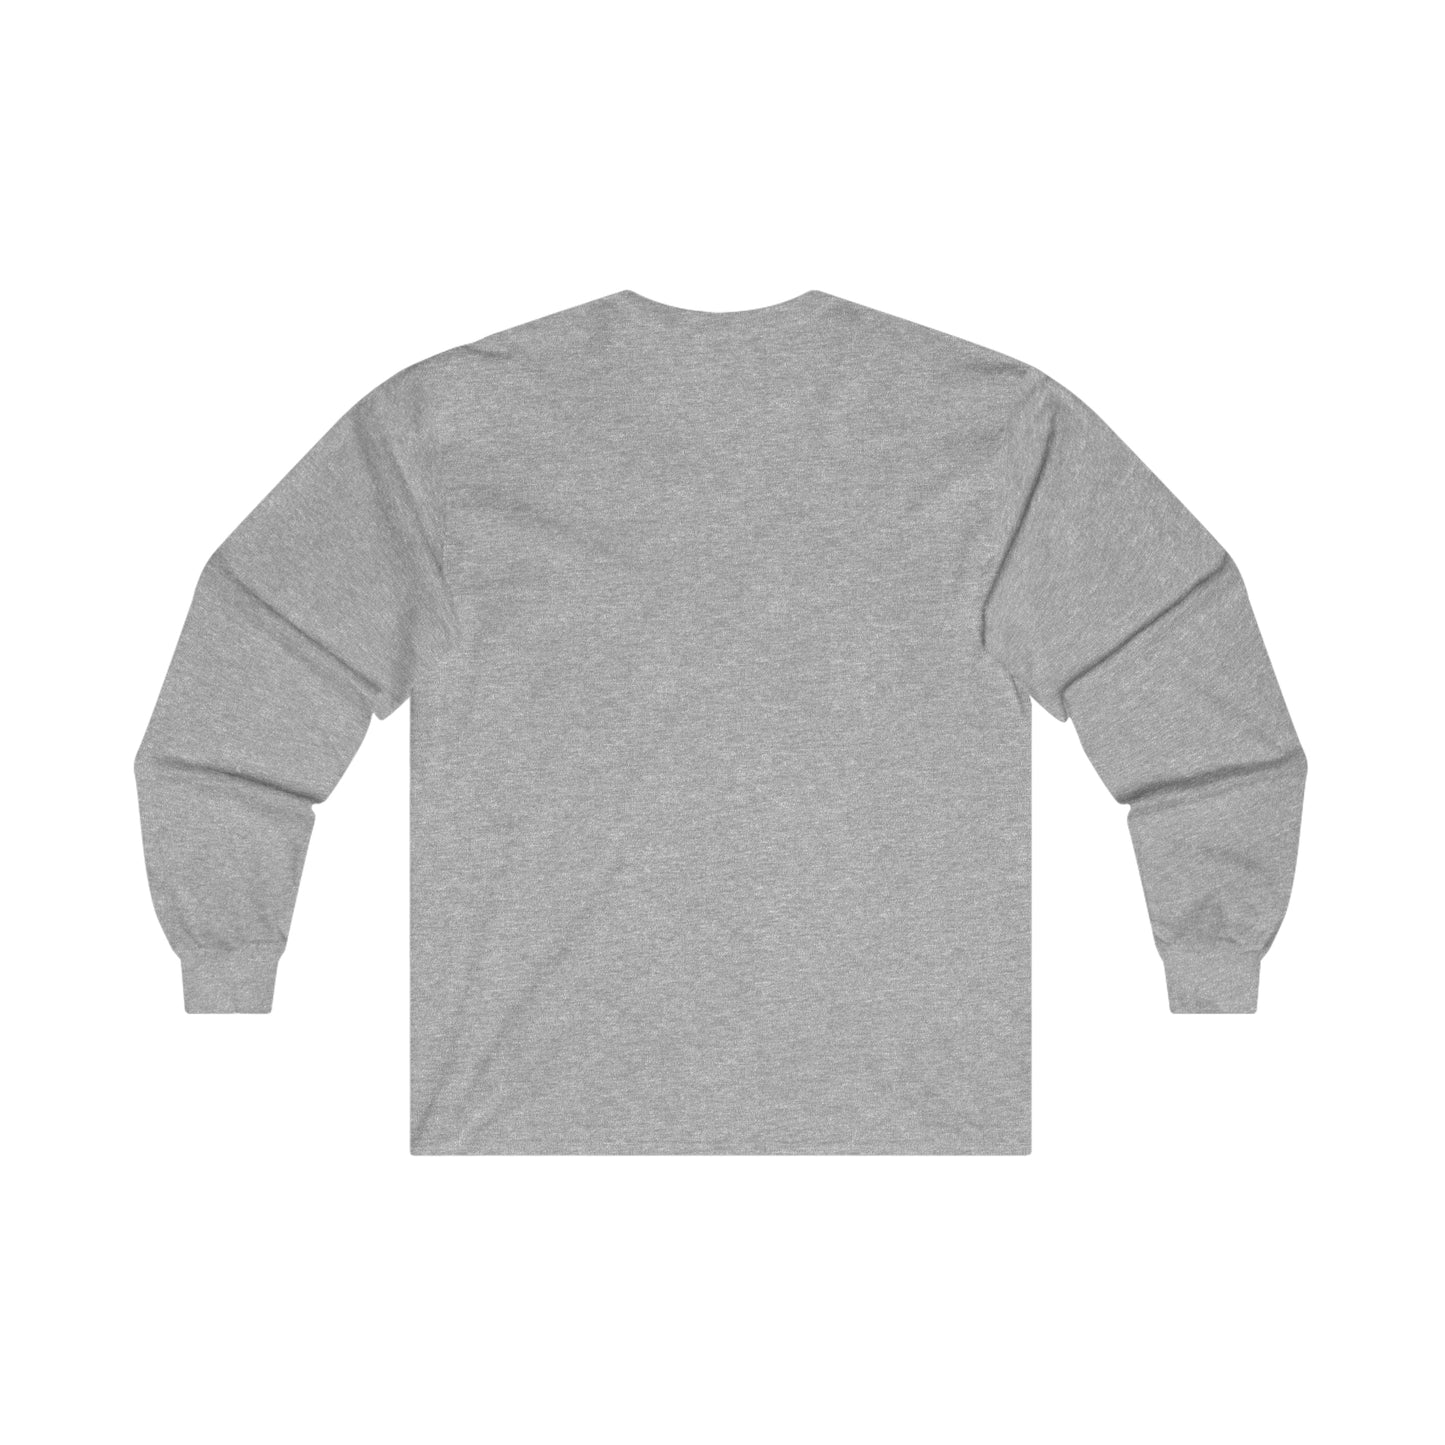 Gods Hand Passing Cigarette - Ultra Cotton Long Sleeve Tee